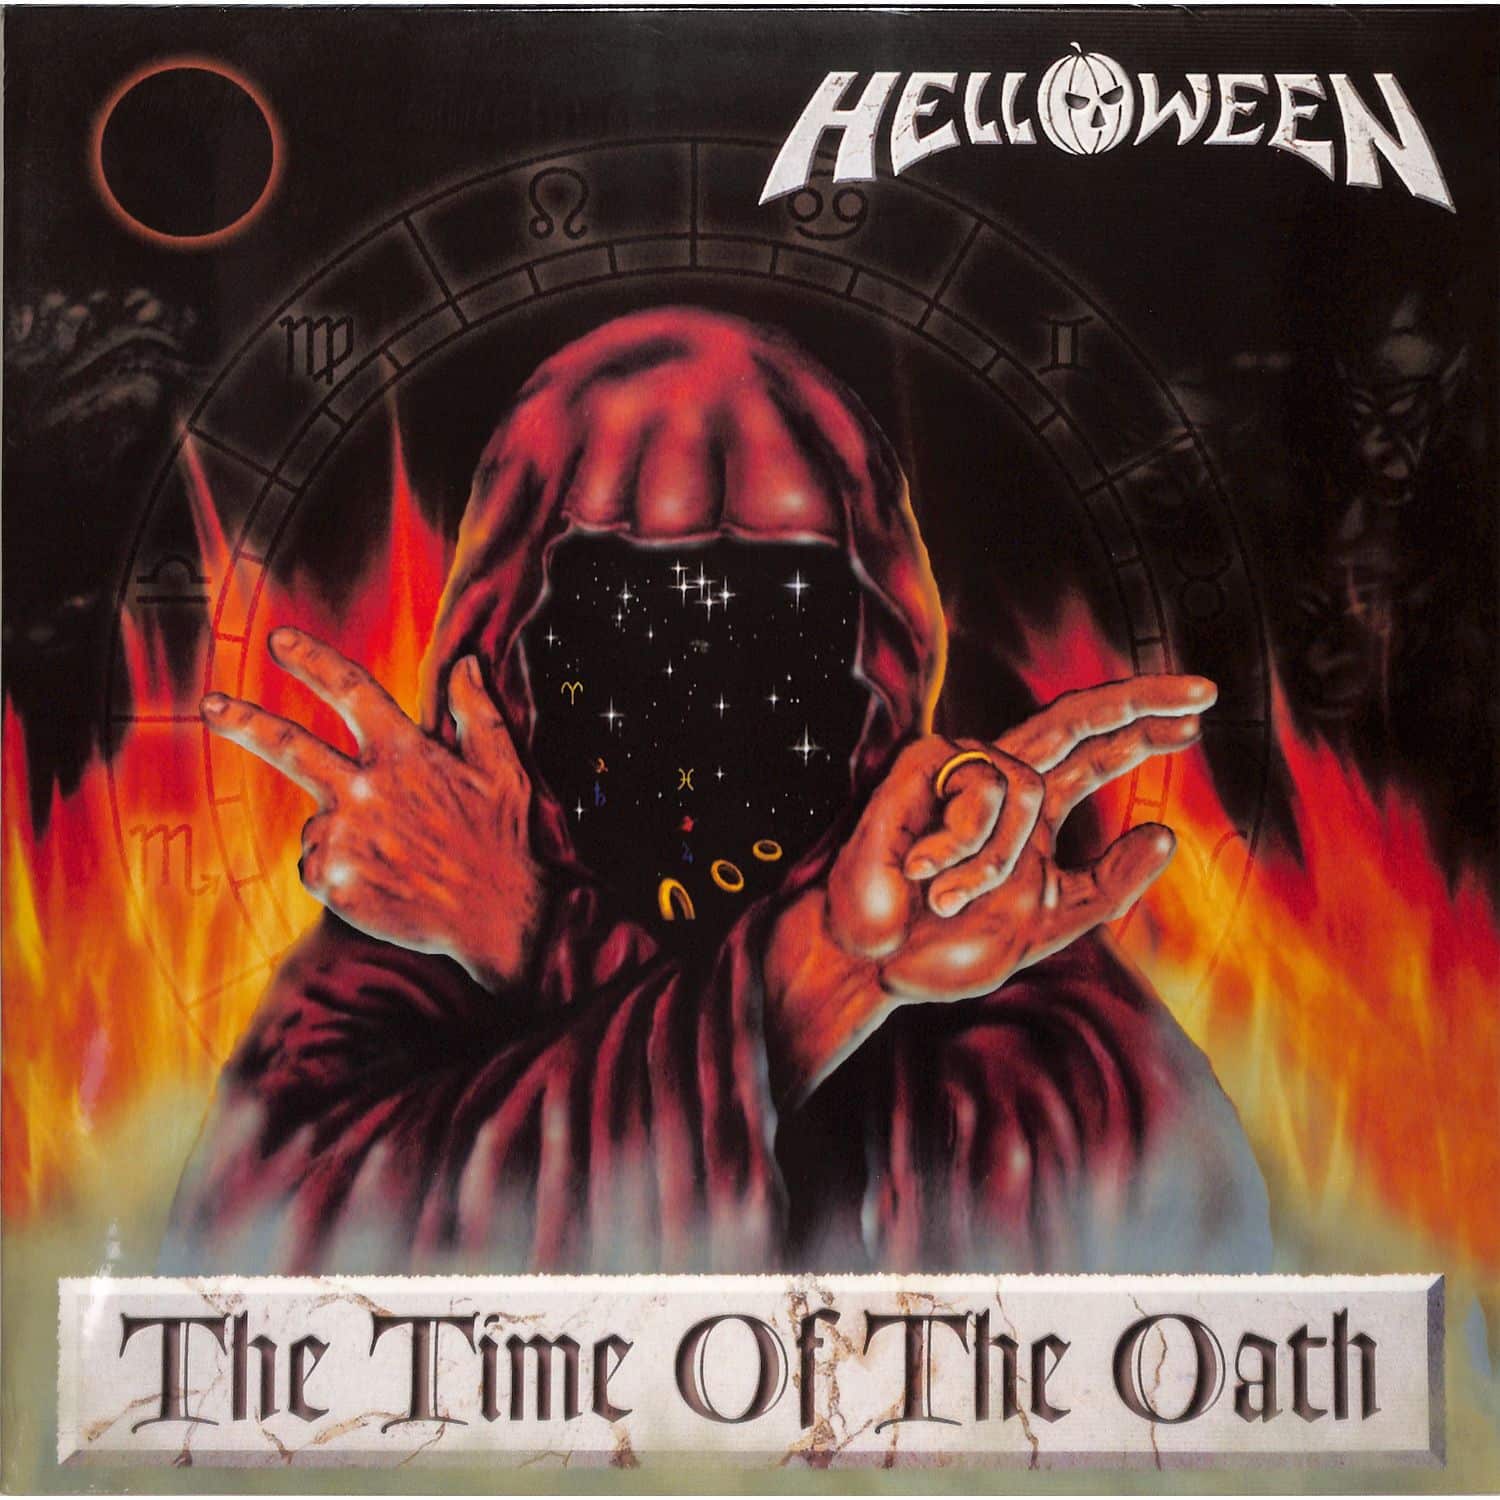 Helloween - THE TIME OF THE OATH 